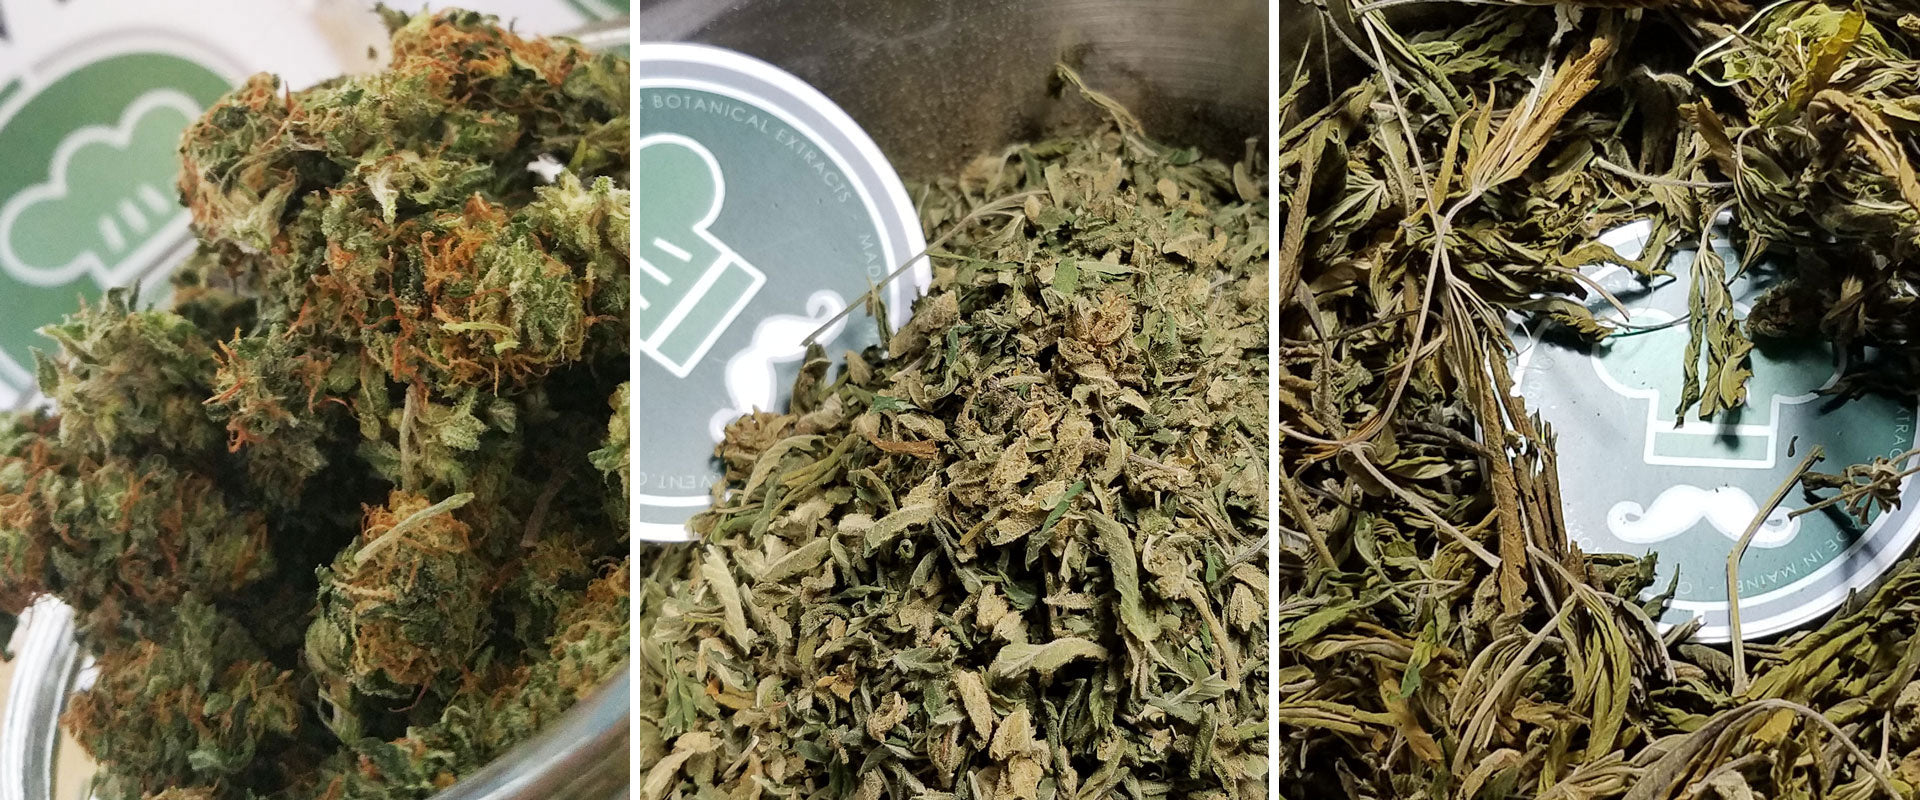 cannabis bud, trim, or shake can be used for alcohol quick wash tinctures